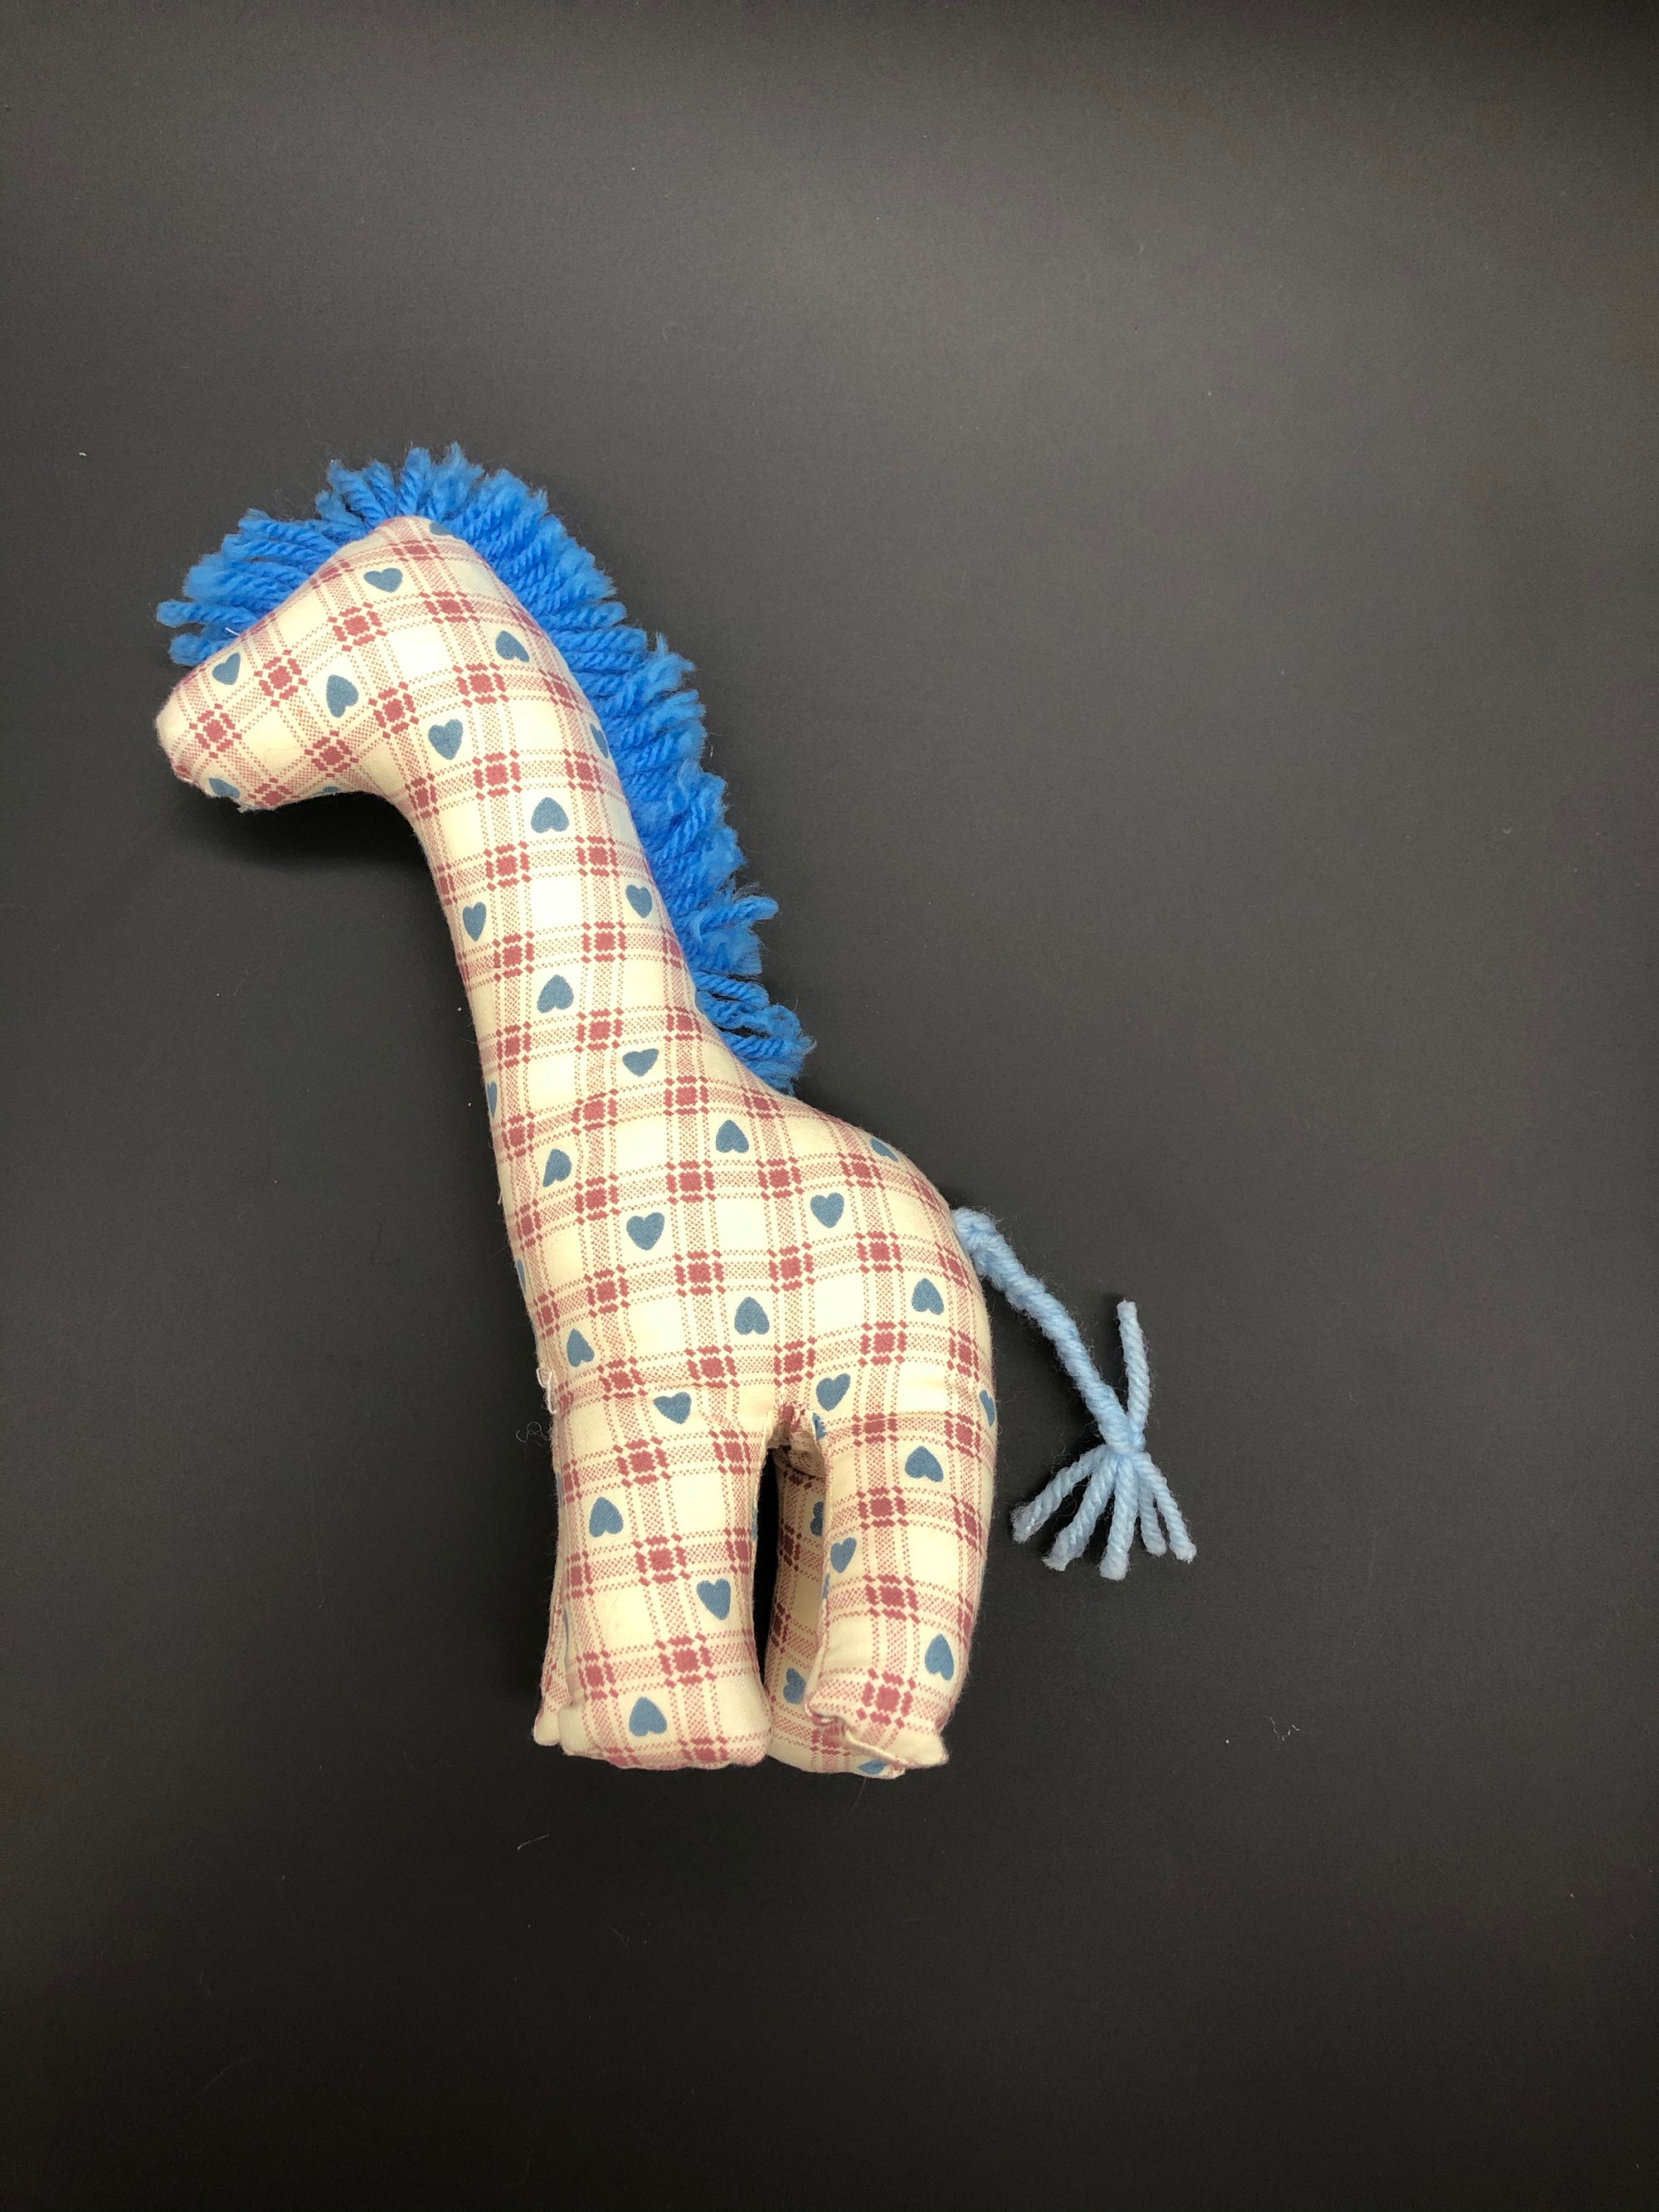 Giraffe with blue hearts and red plaid